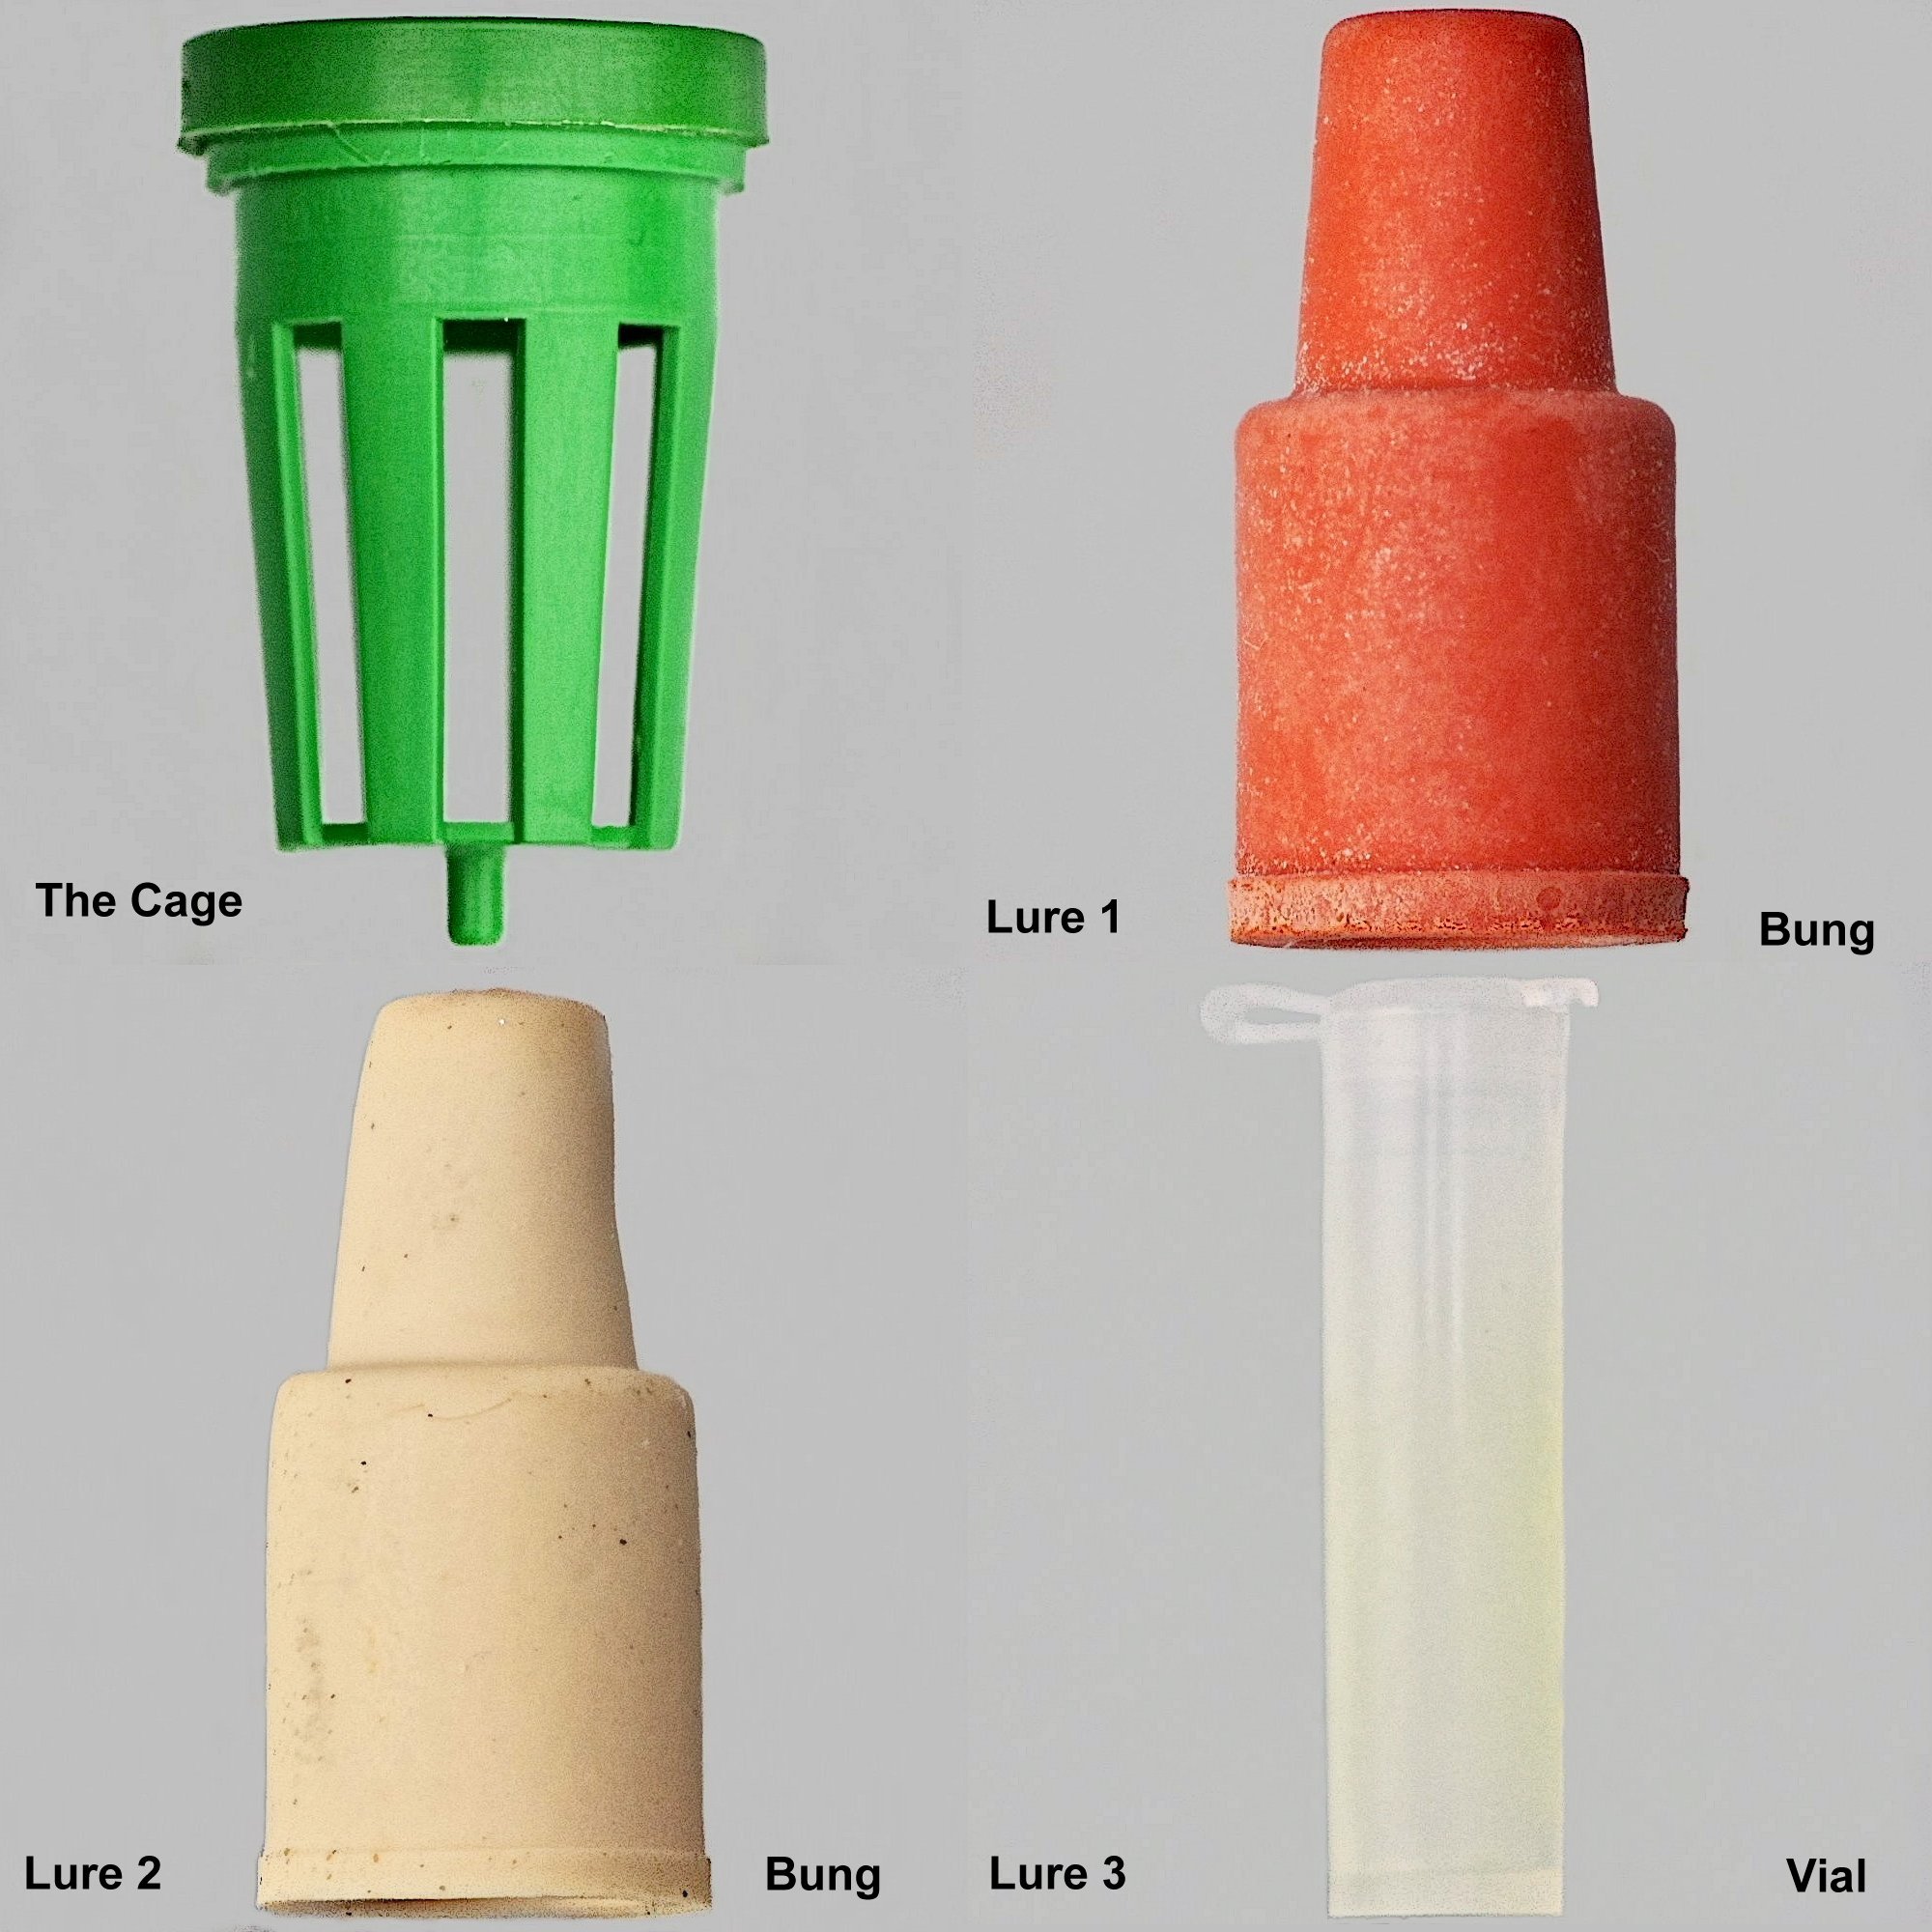 2x2 grid of photos of the components of our trap - a bung with vertical slices cut out, different lures to fit, and a vial